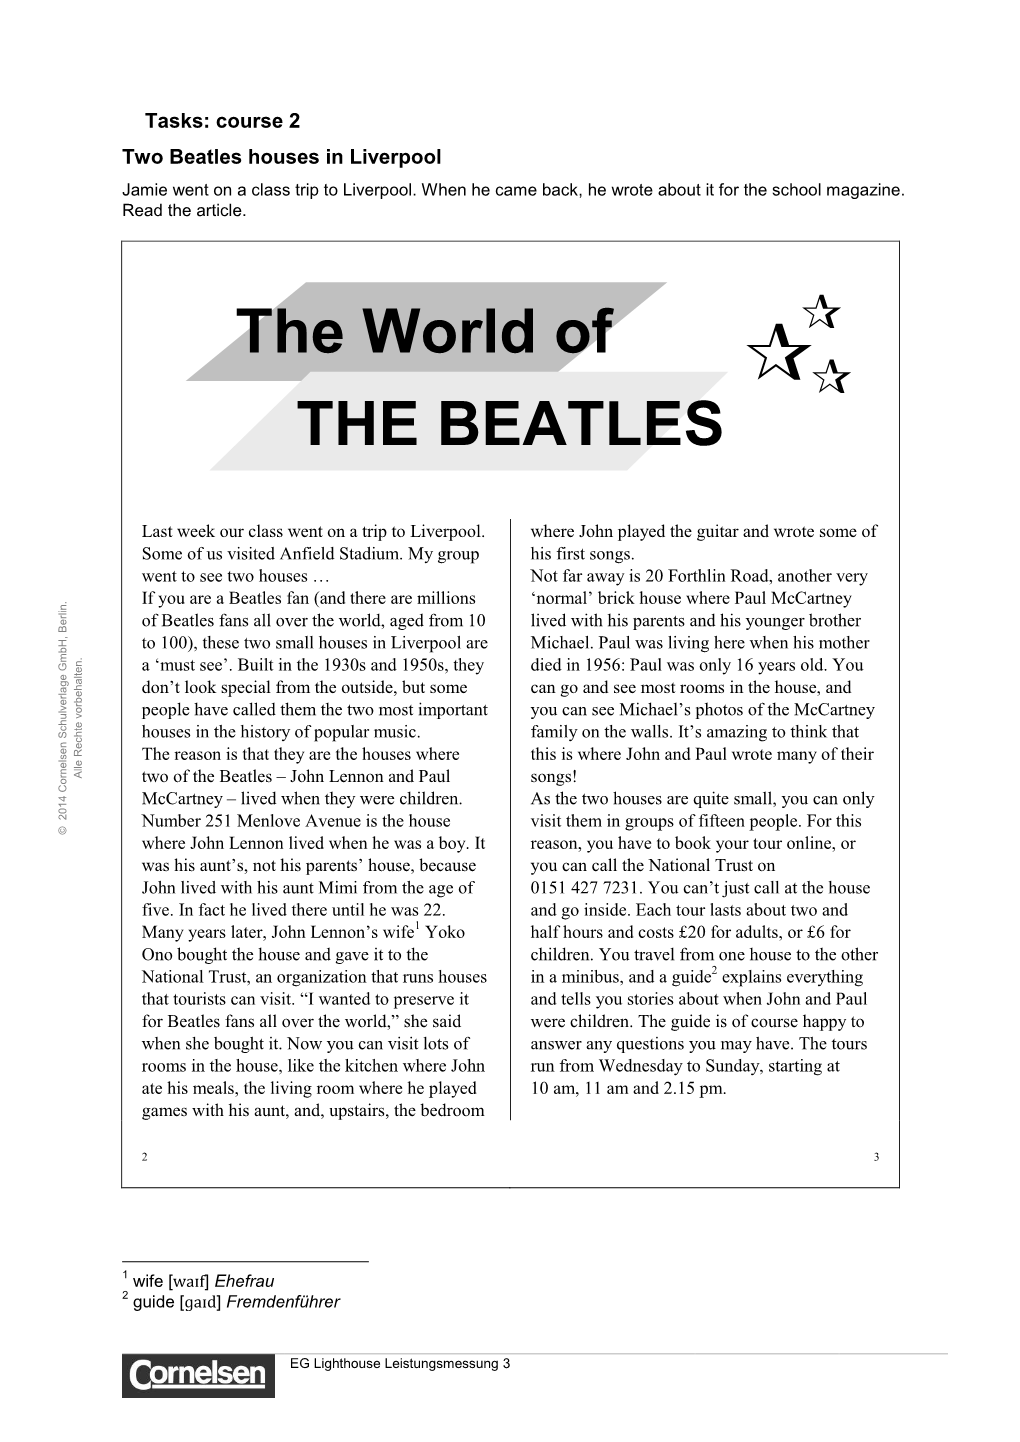 The World of the BEATLES